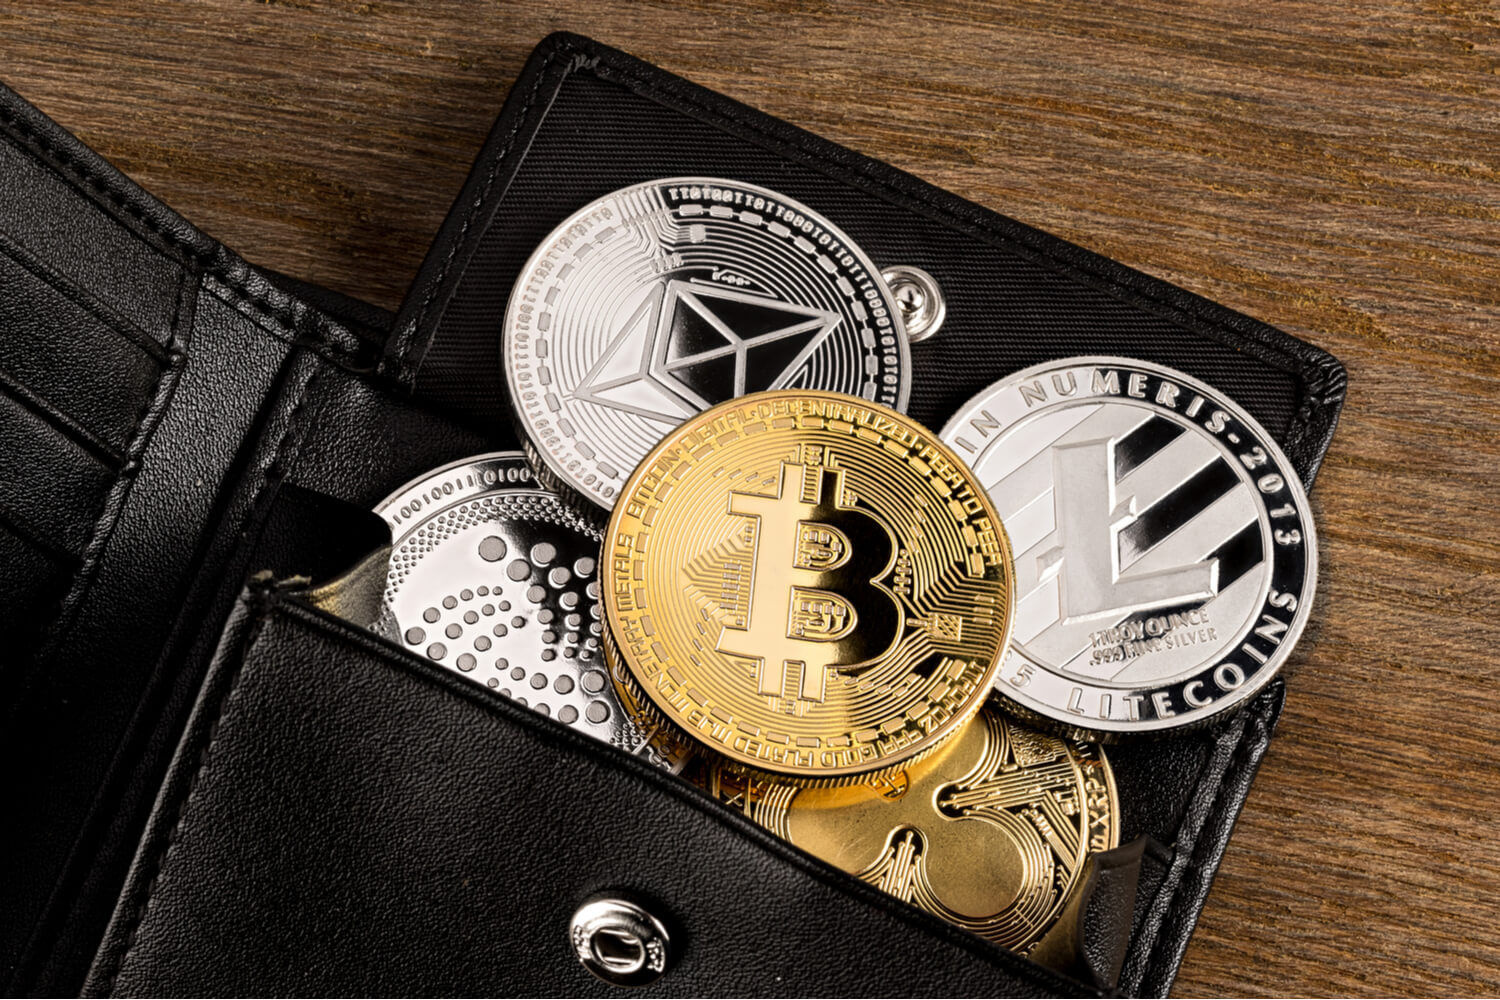 A number of cryptocurrencies (such as Bitcoin, Ethereum and Litecoin), represented as physical coins, spilling out of a black leather wallet on a wooden background. 